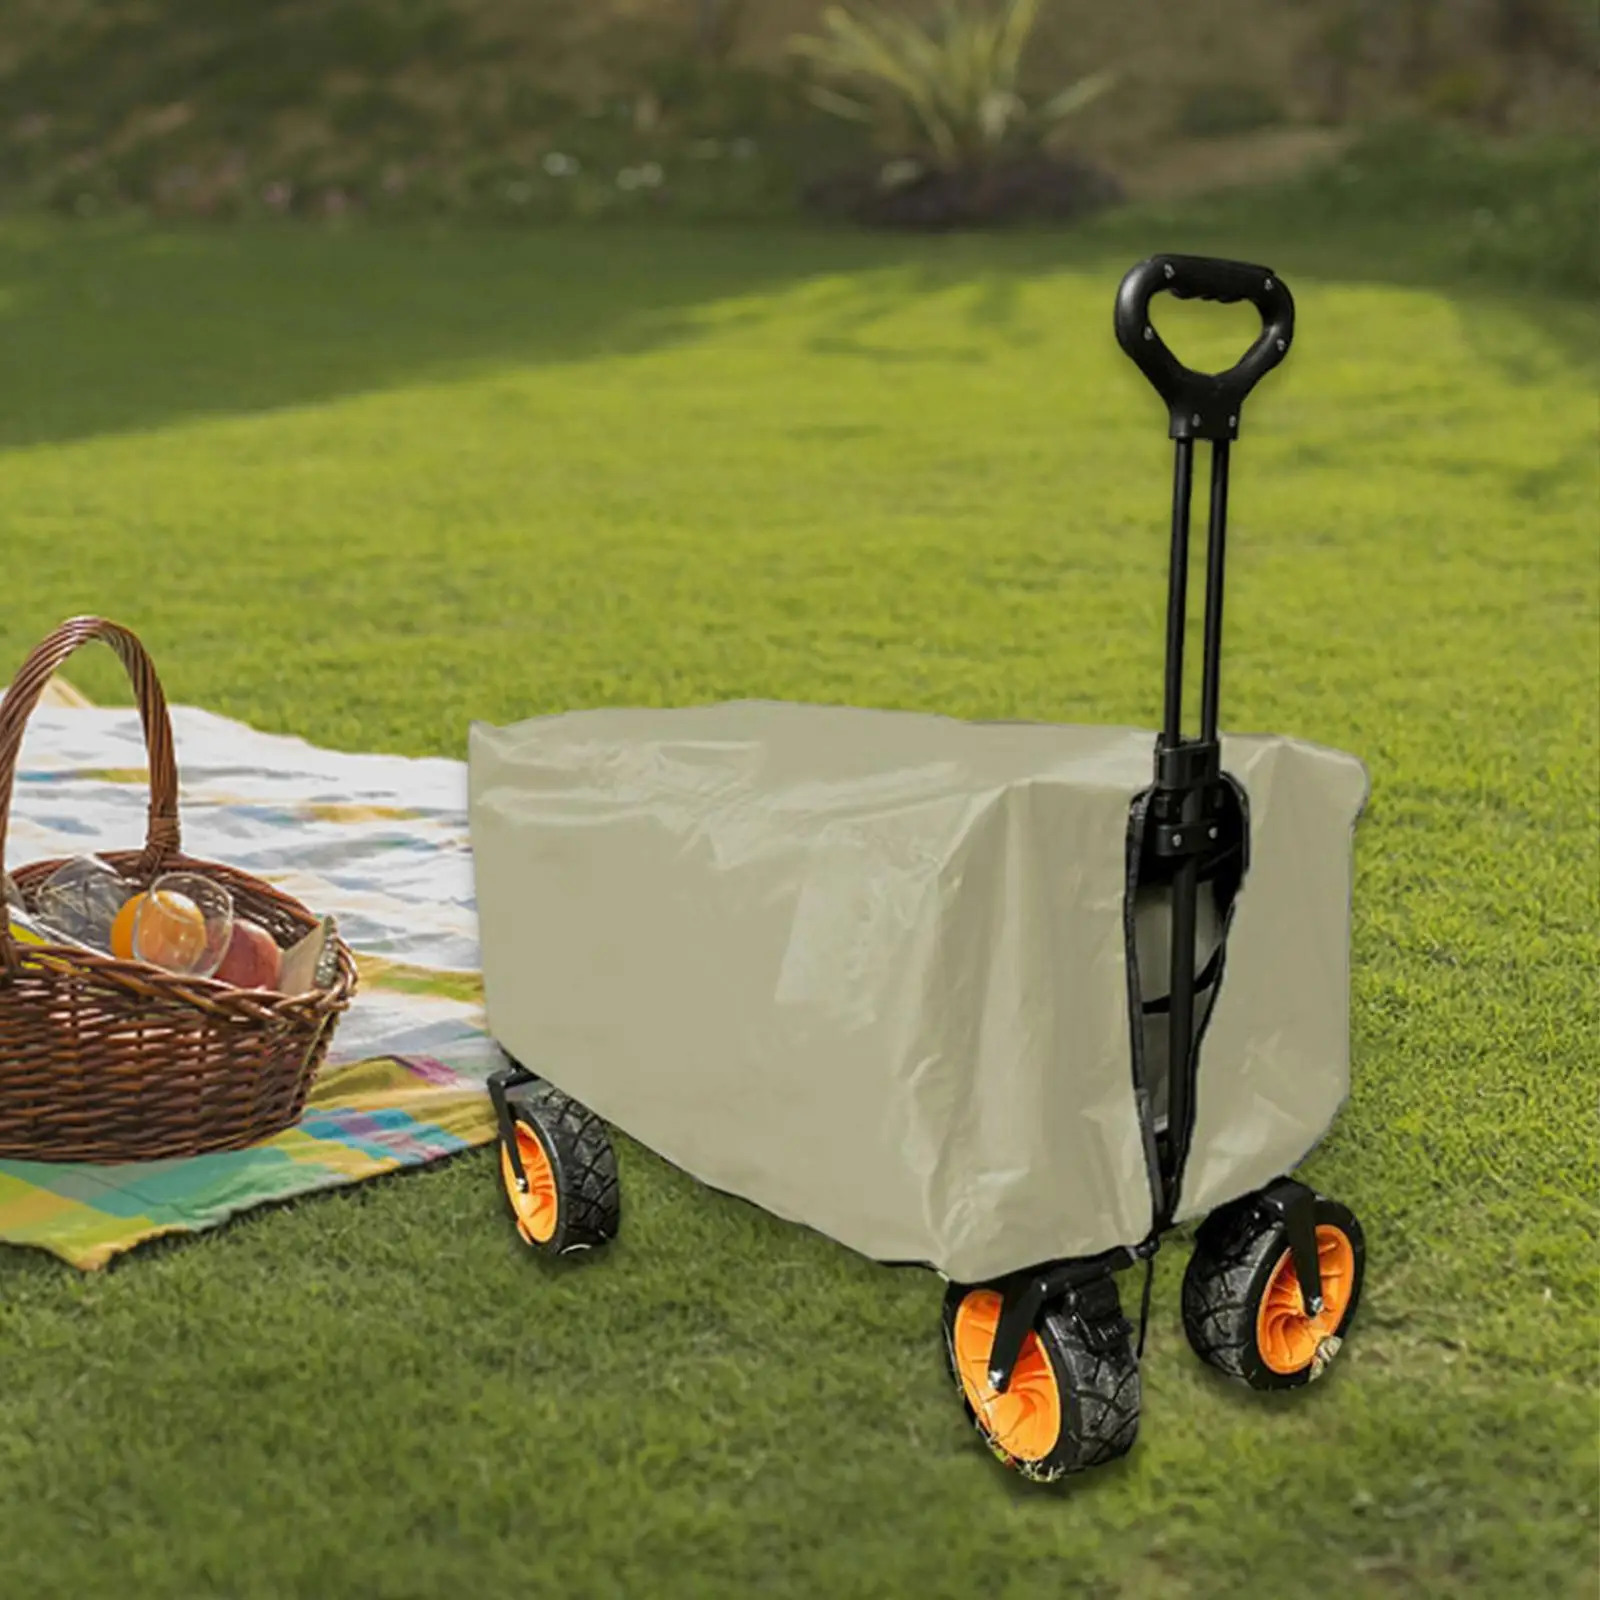 Outdoor Folding Wagon Cover Protective Cover 35x20x18inch Durable Tear Resistant Oxford Cloth for Collapsible Wagon Carts